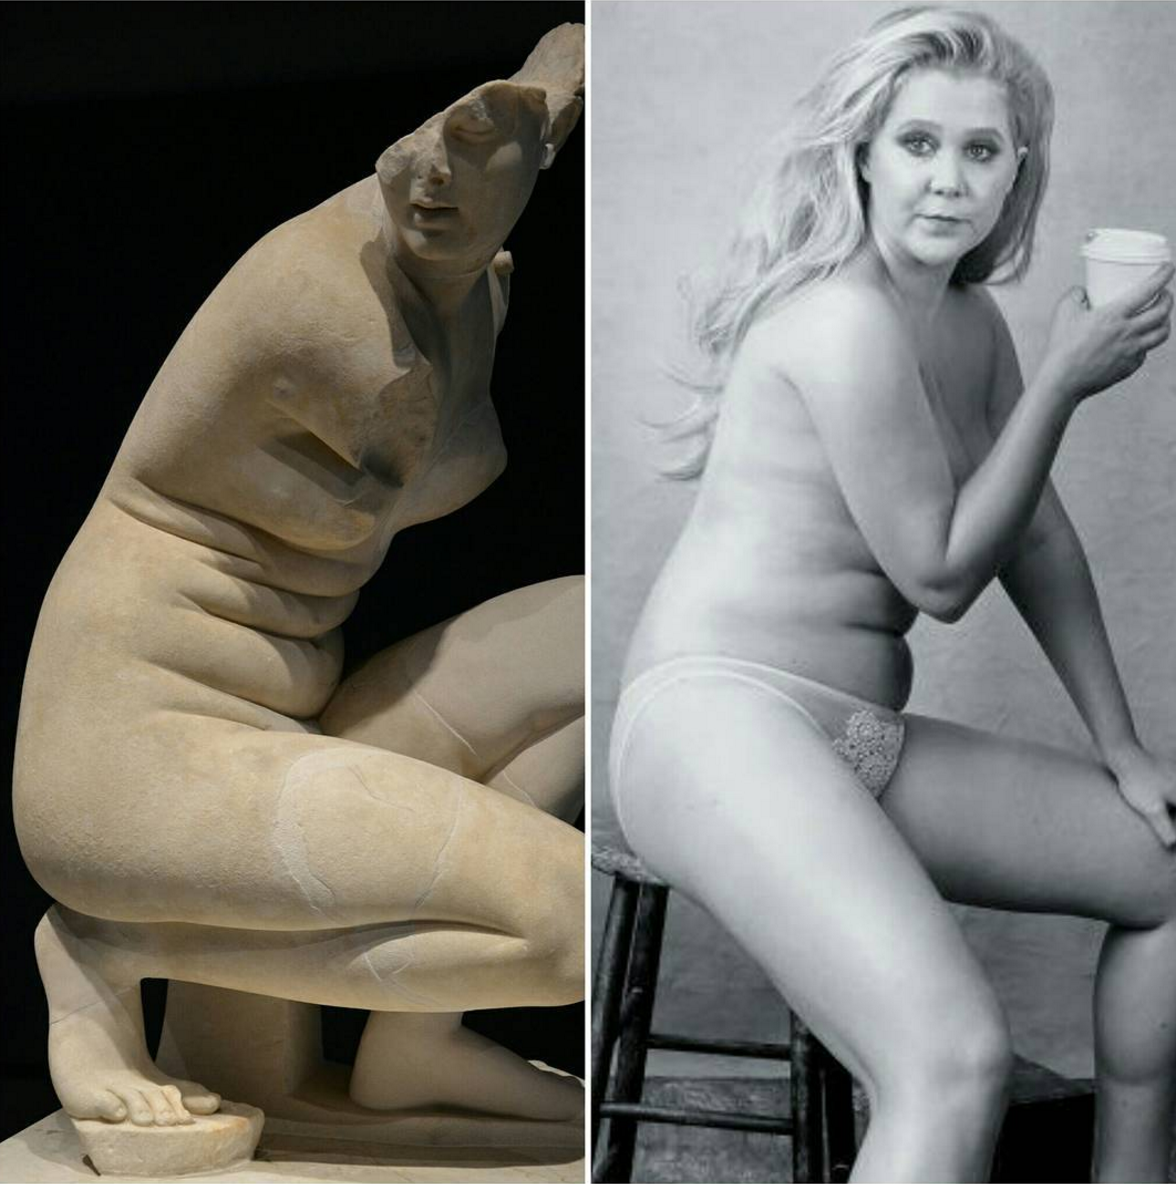 anne horn recommends amy schumer been nude pic